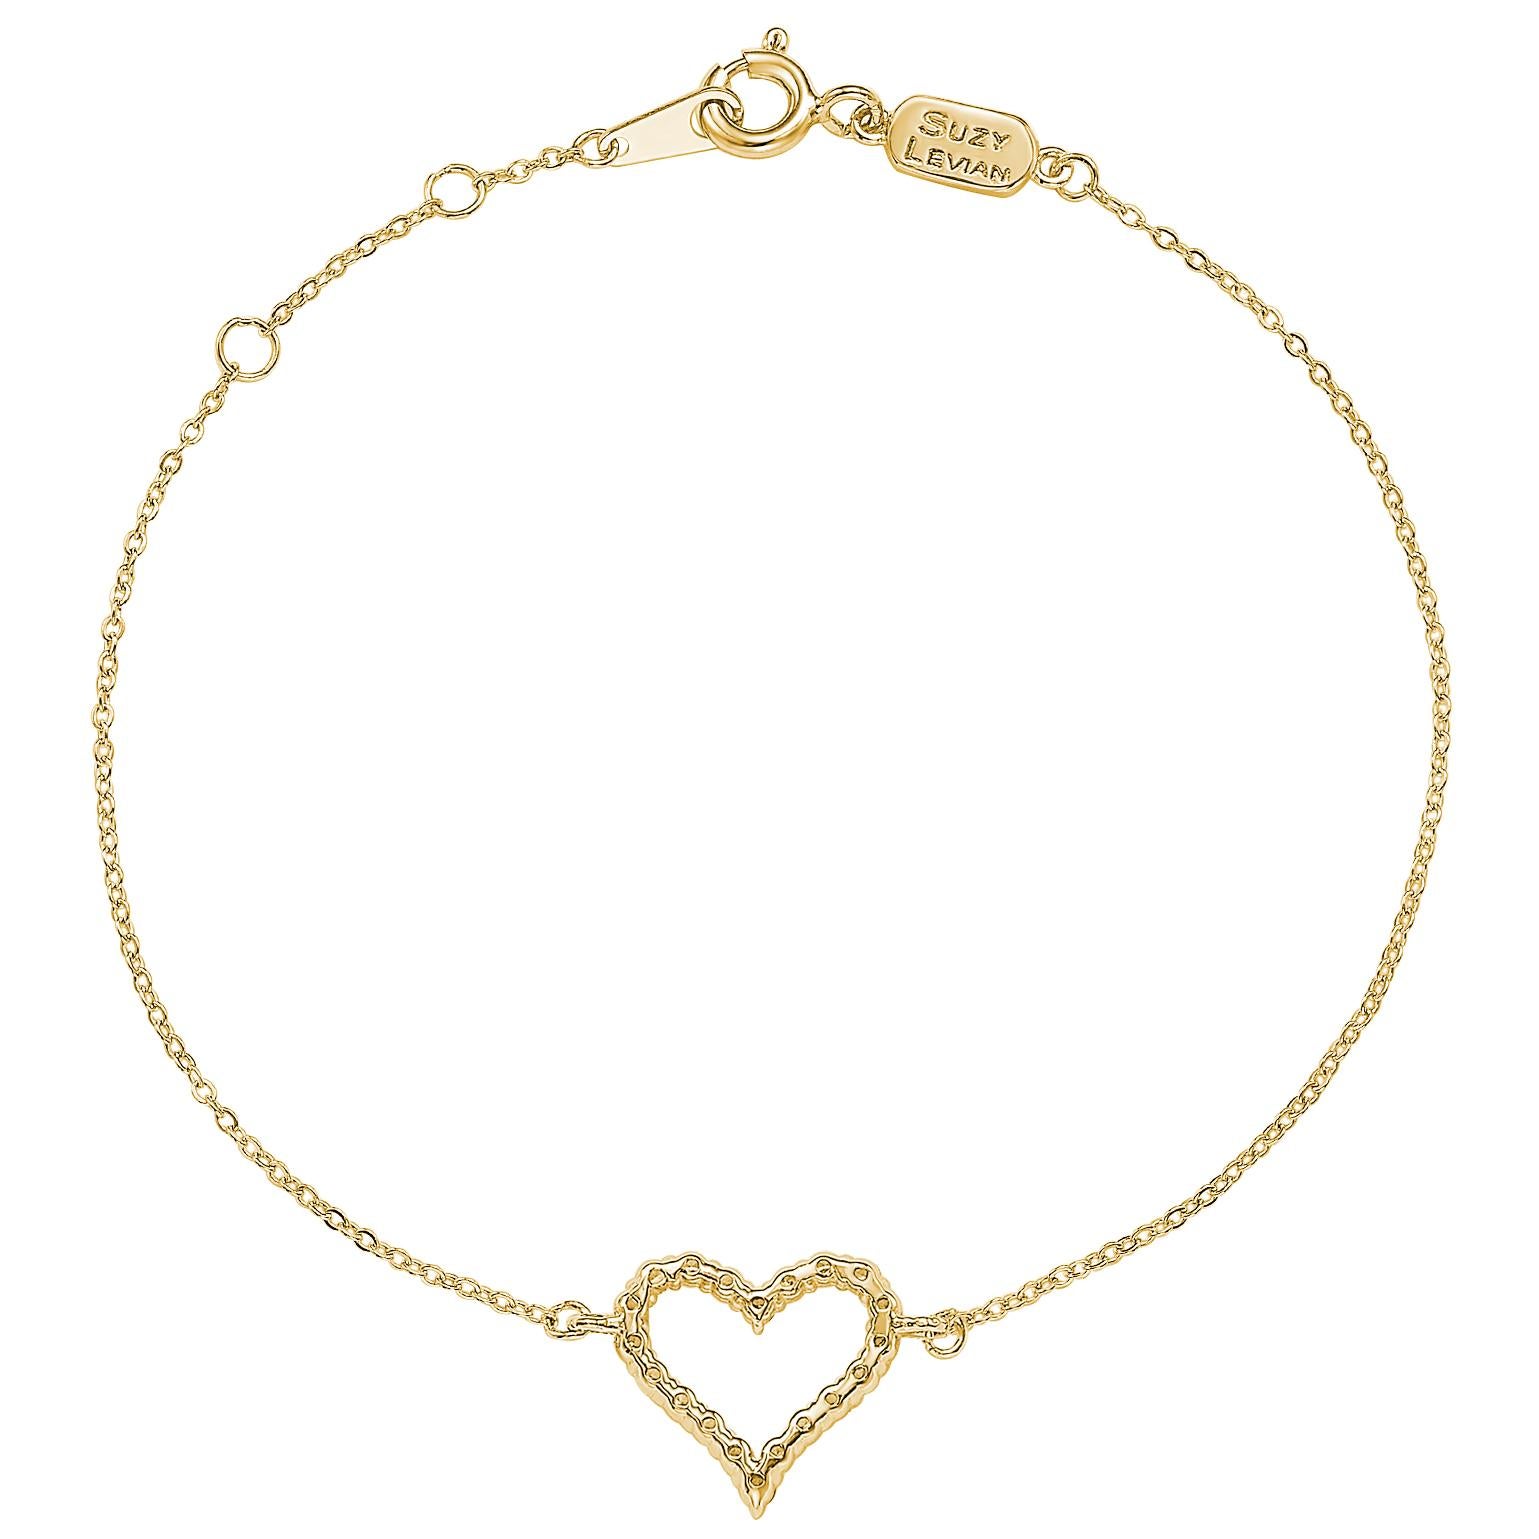 This elegant Suzy Levian heart solitaire bracelet features 19 diamonds, which are 1.4 mm size totals .24 cttw, all set in 14K yellow gold setting. Each diamond heart is attached to a chain that is secured with a spring ring closure with a white gold